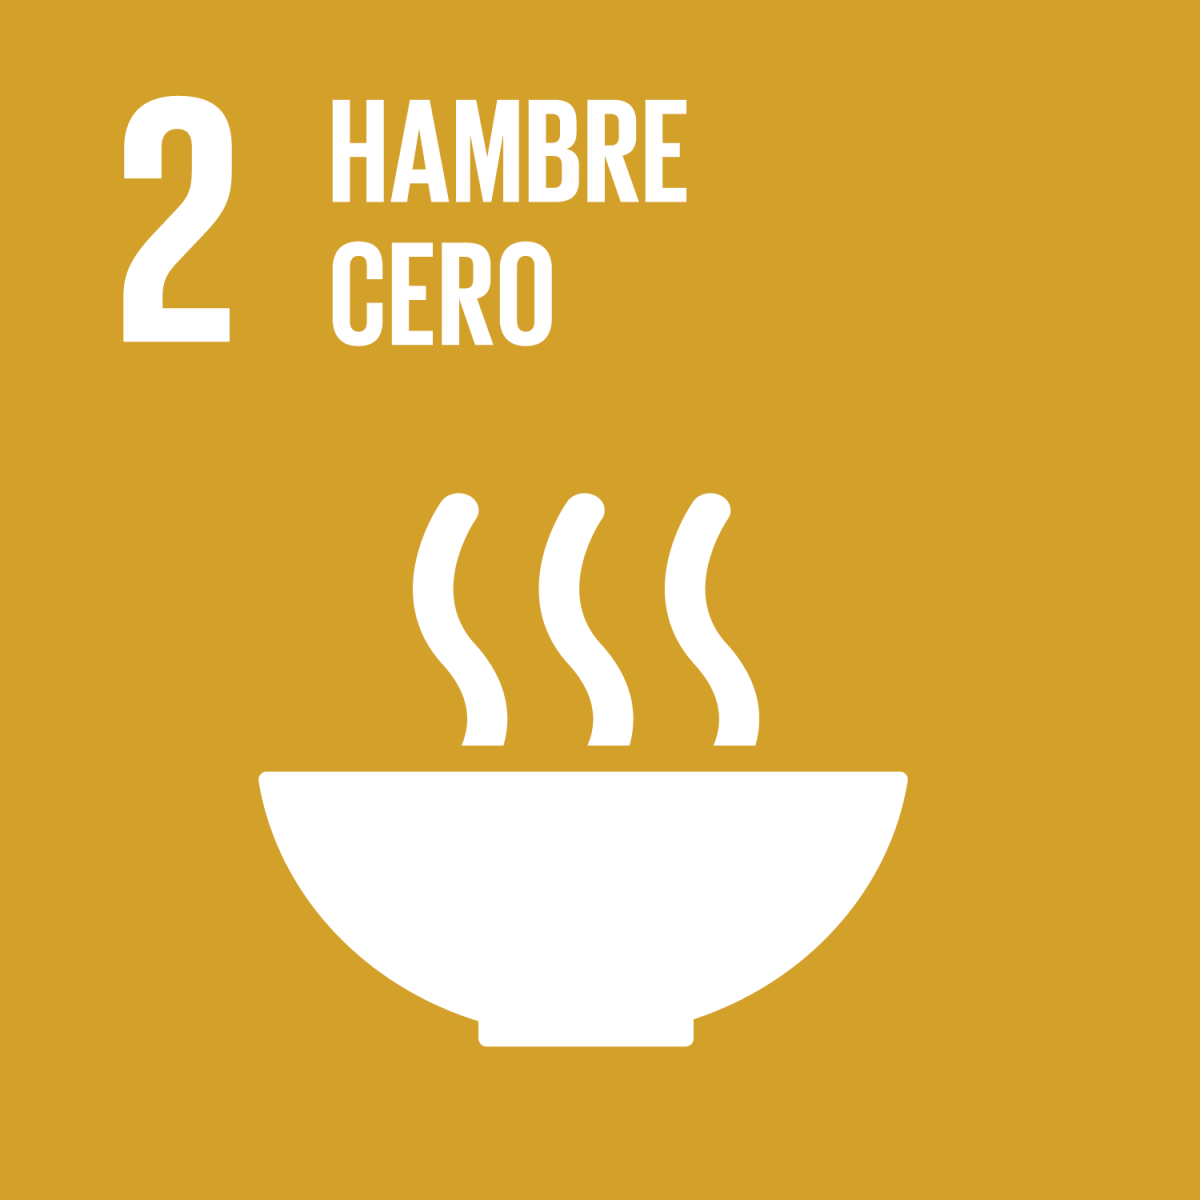 Image SDG 2: Zero Hunger (By clicking on the image you will get more information about the SDG)